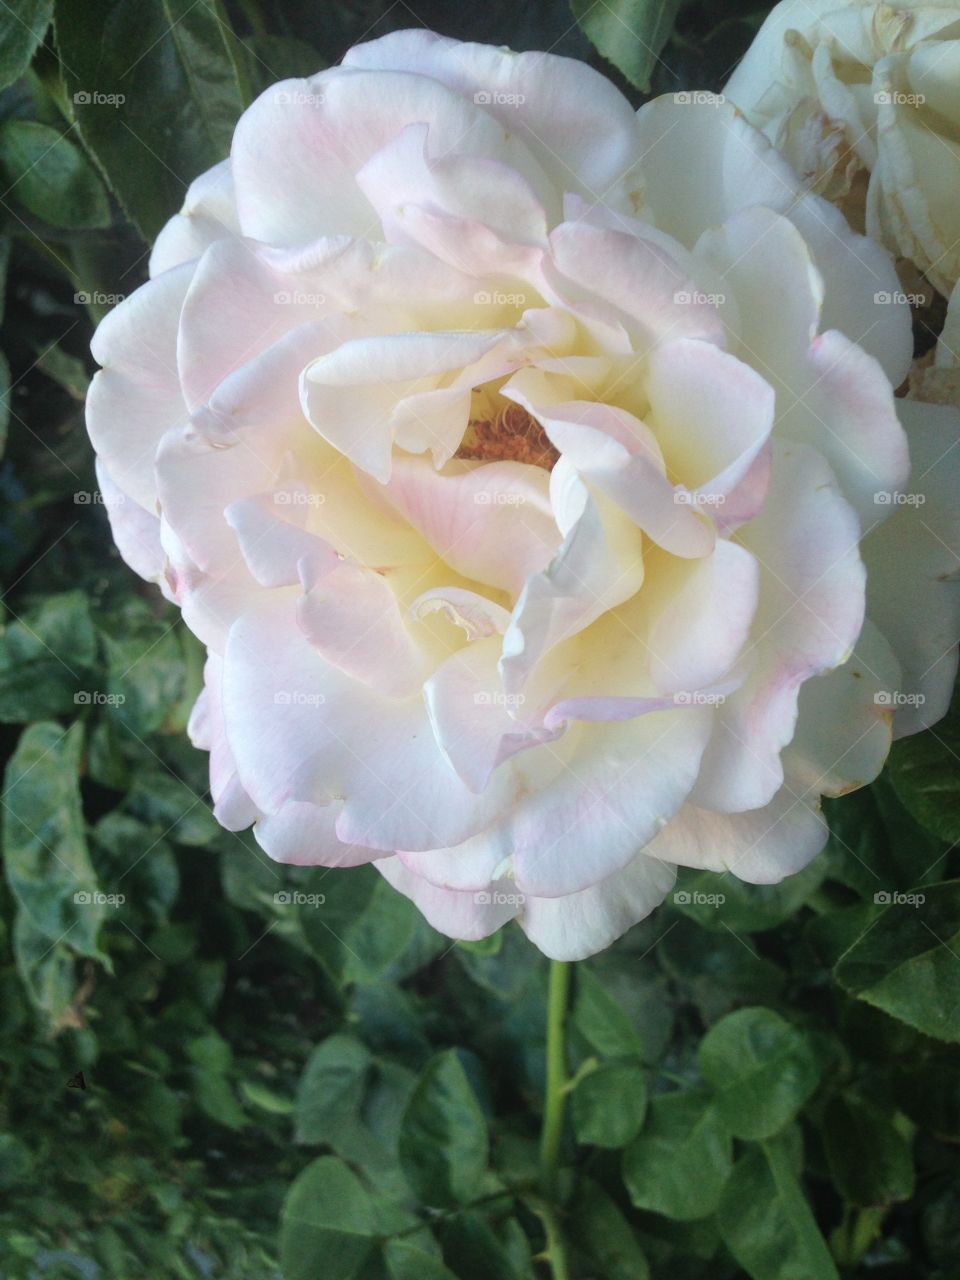 White rose with a hint of yellow and pink